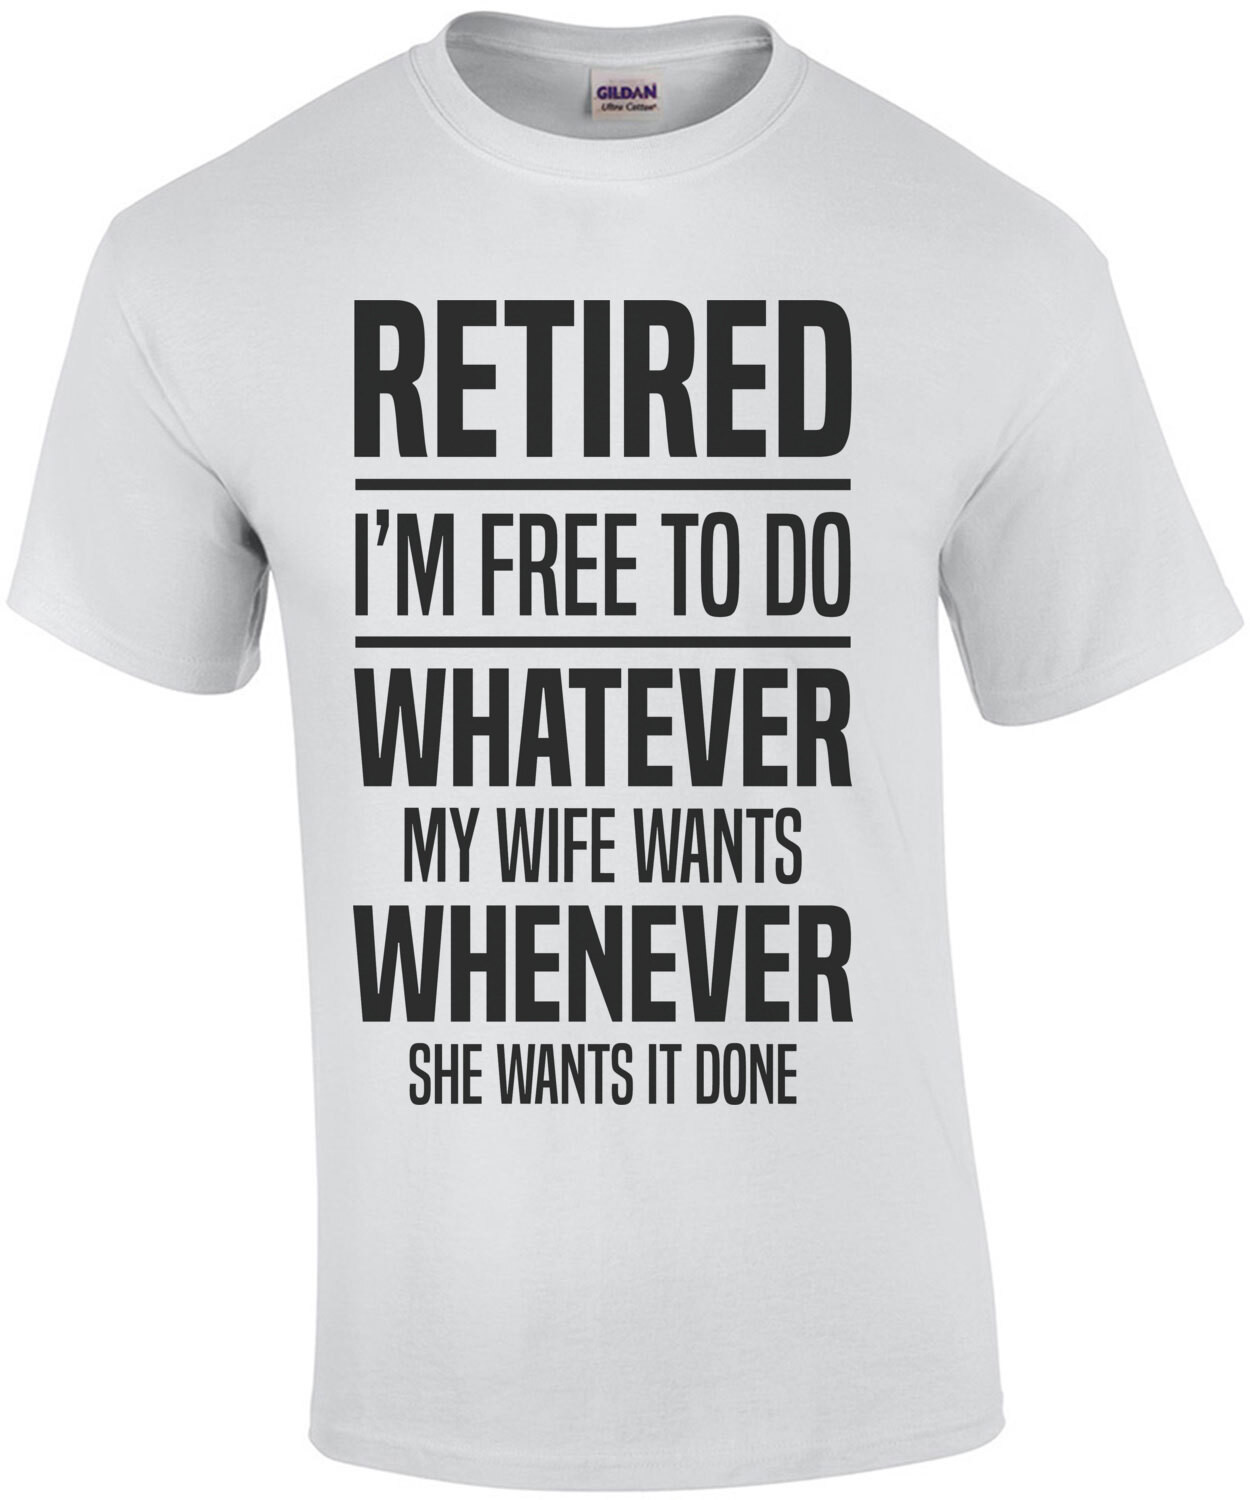 Retired - I'm free to do whatever my wife wants whenever she wants it done - funny retirement t-shirt